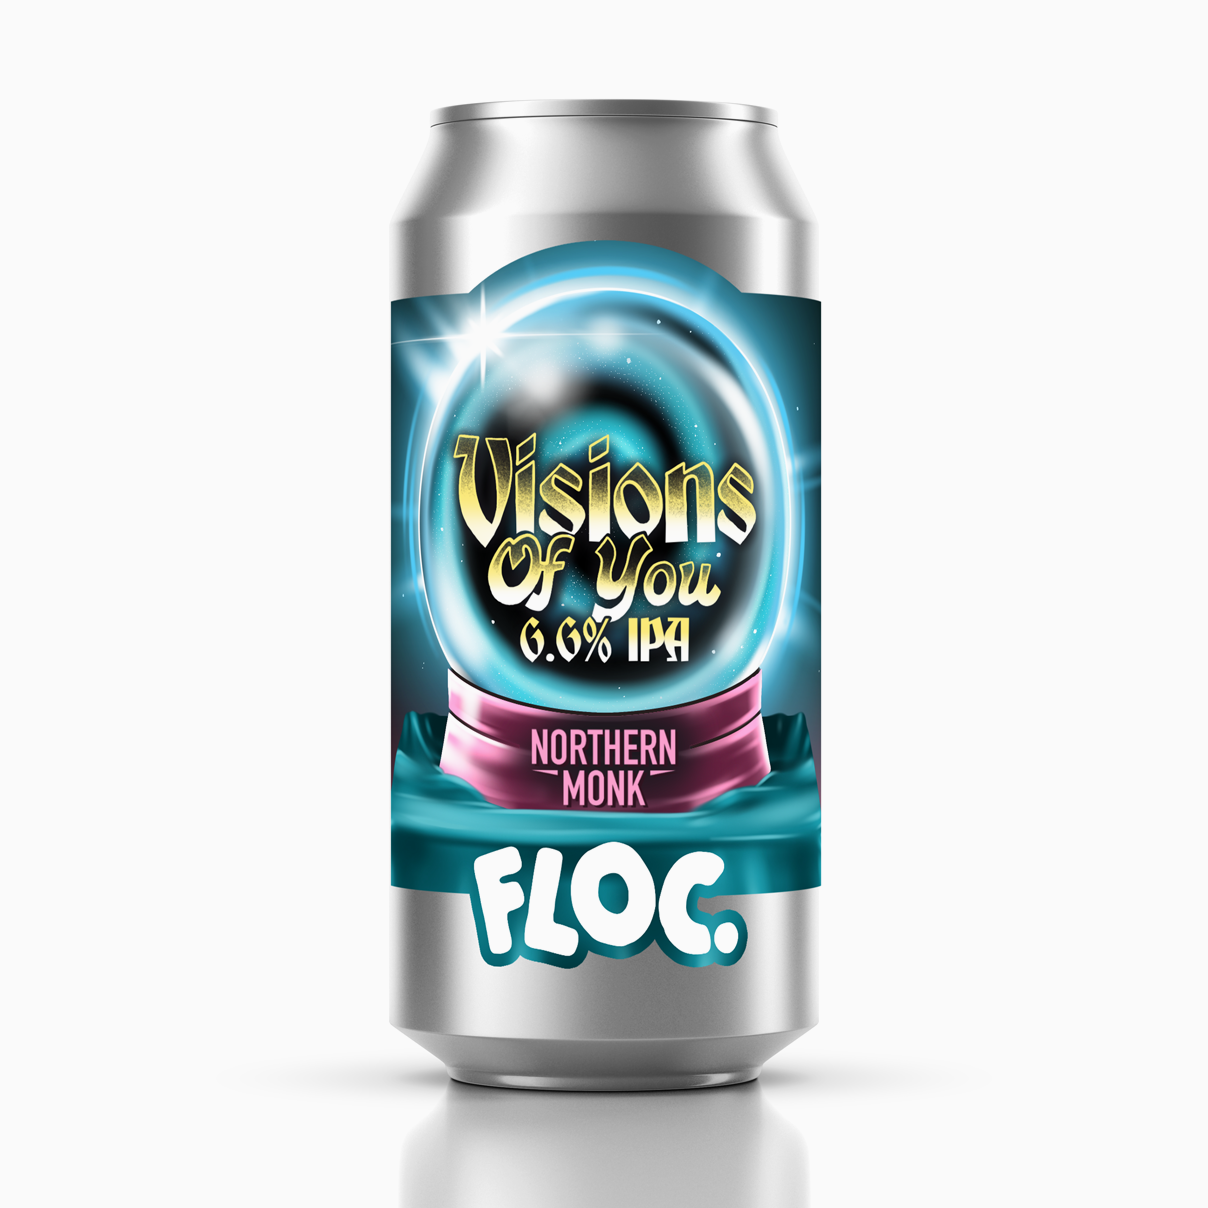 Floc x Northern Monk Visions Of You IPA